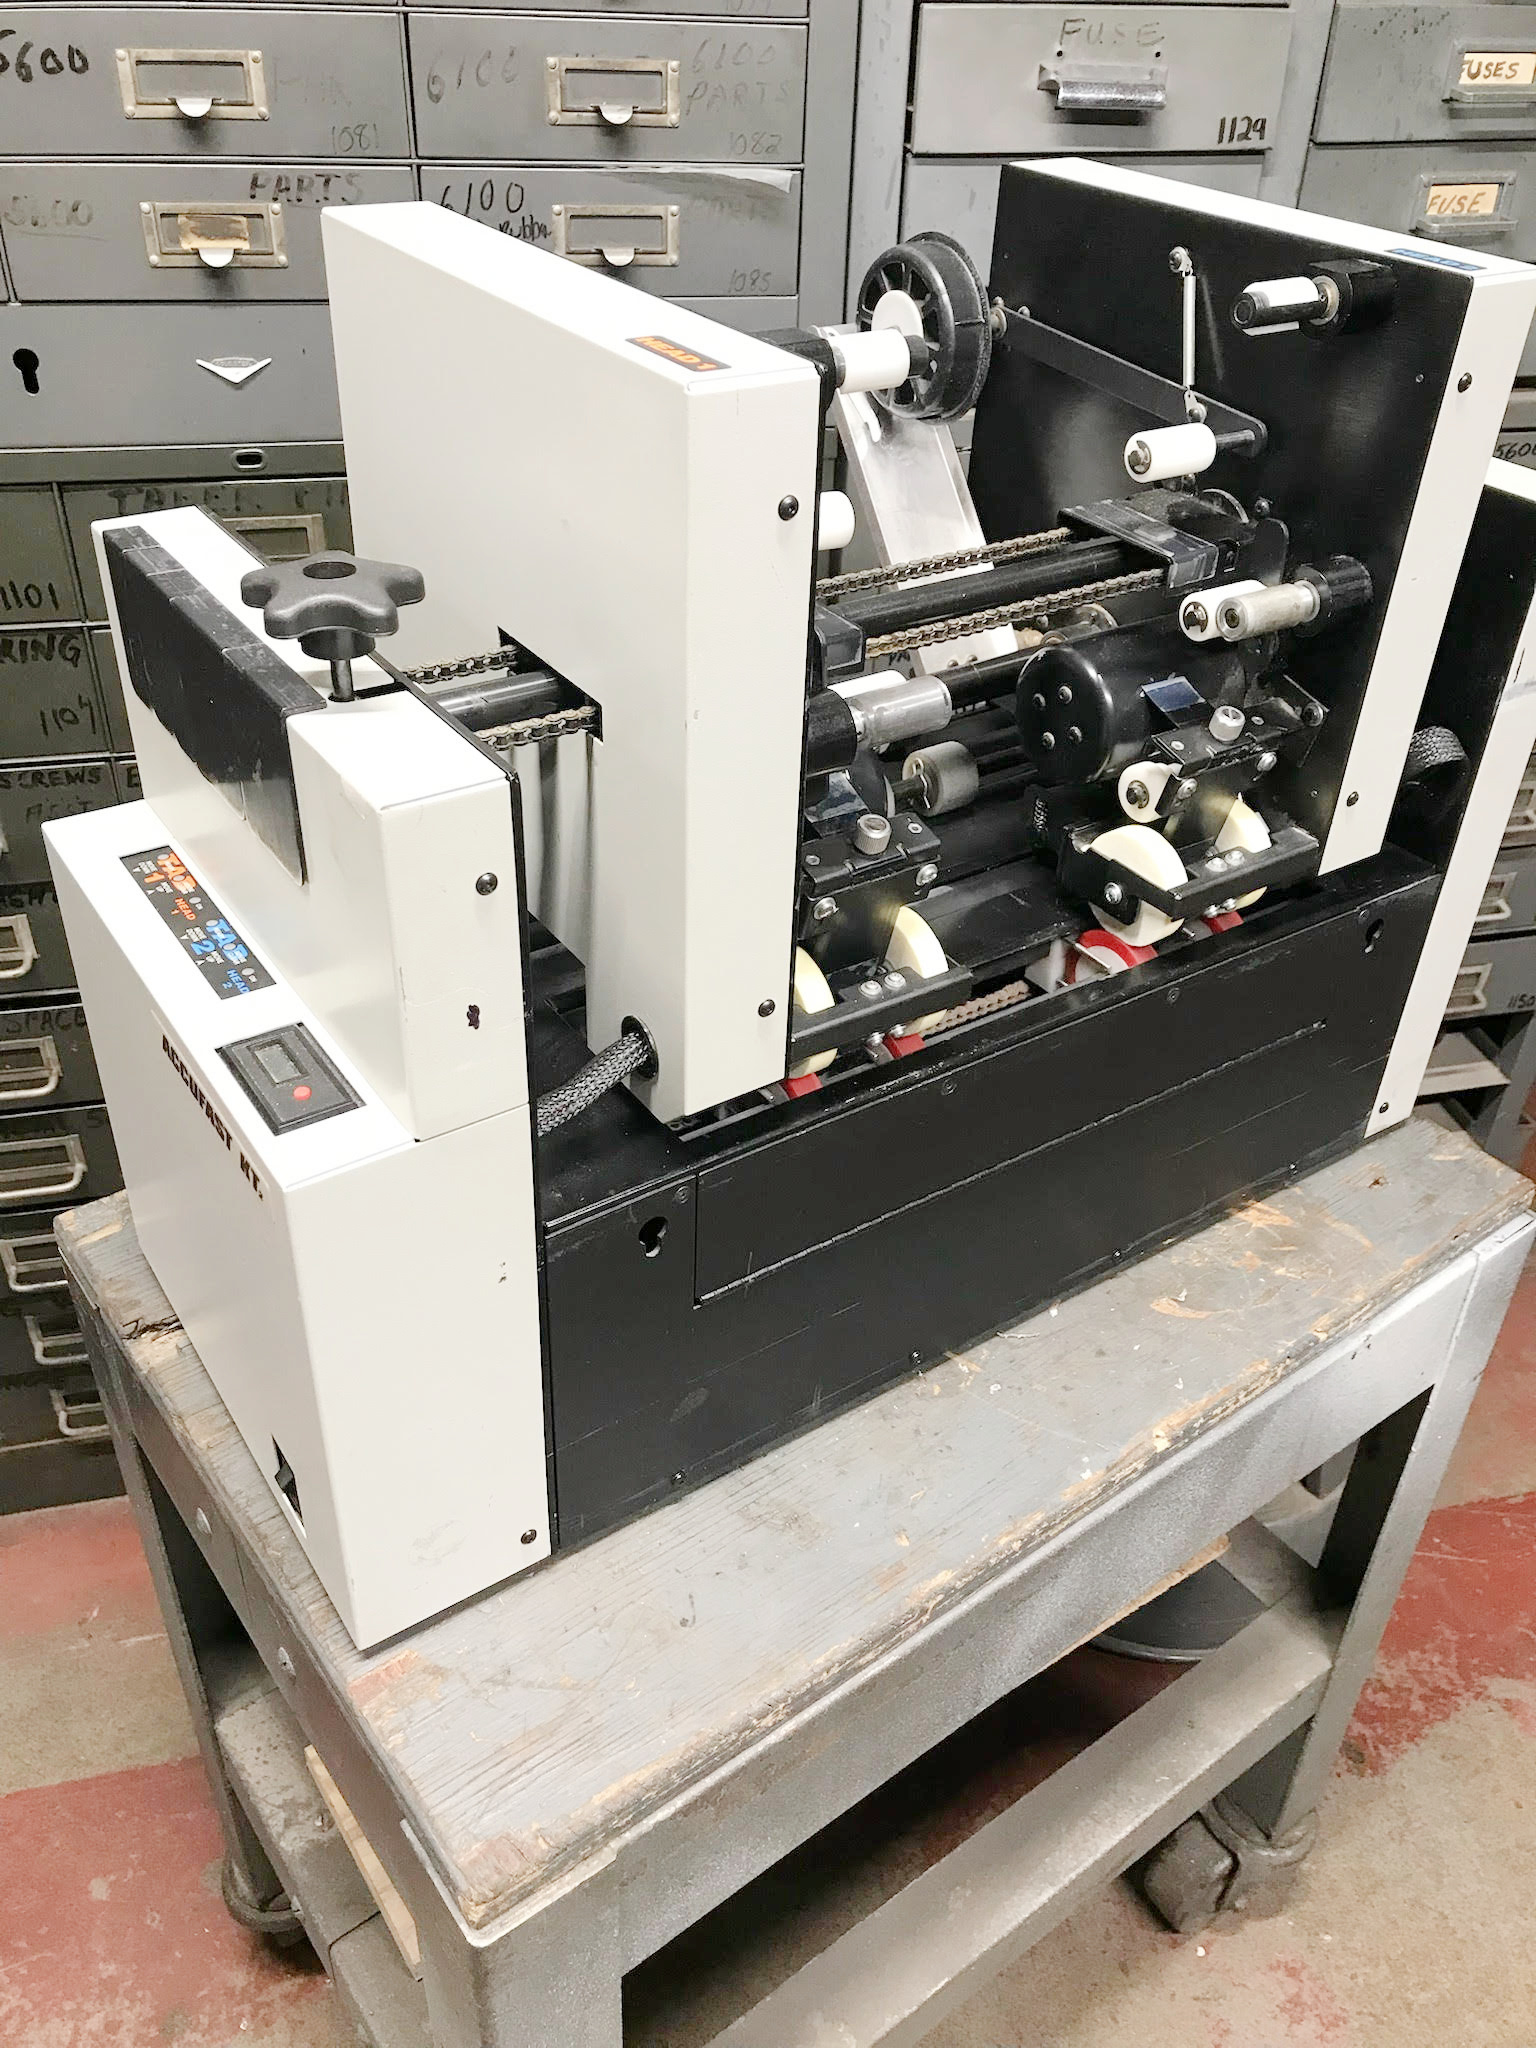 Equipment Lot: Accufast XL Labeler with Stamp Affixer & Accufast KT with FX (Refurbished) (Used) Item # UE-011122A (New Hampshire)